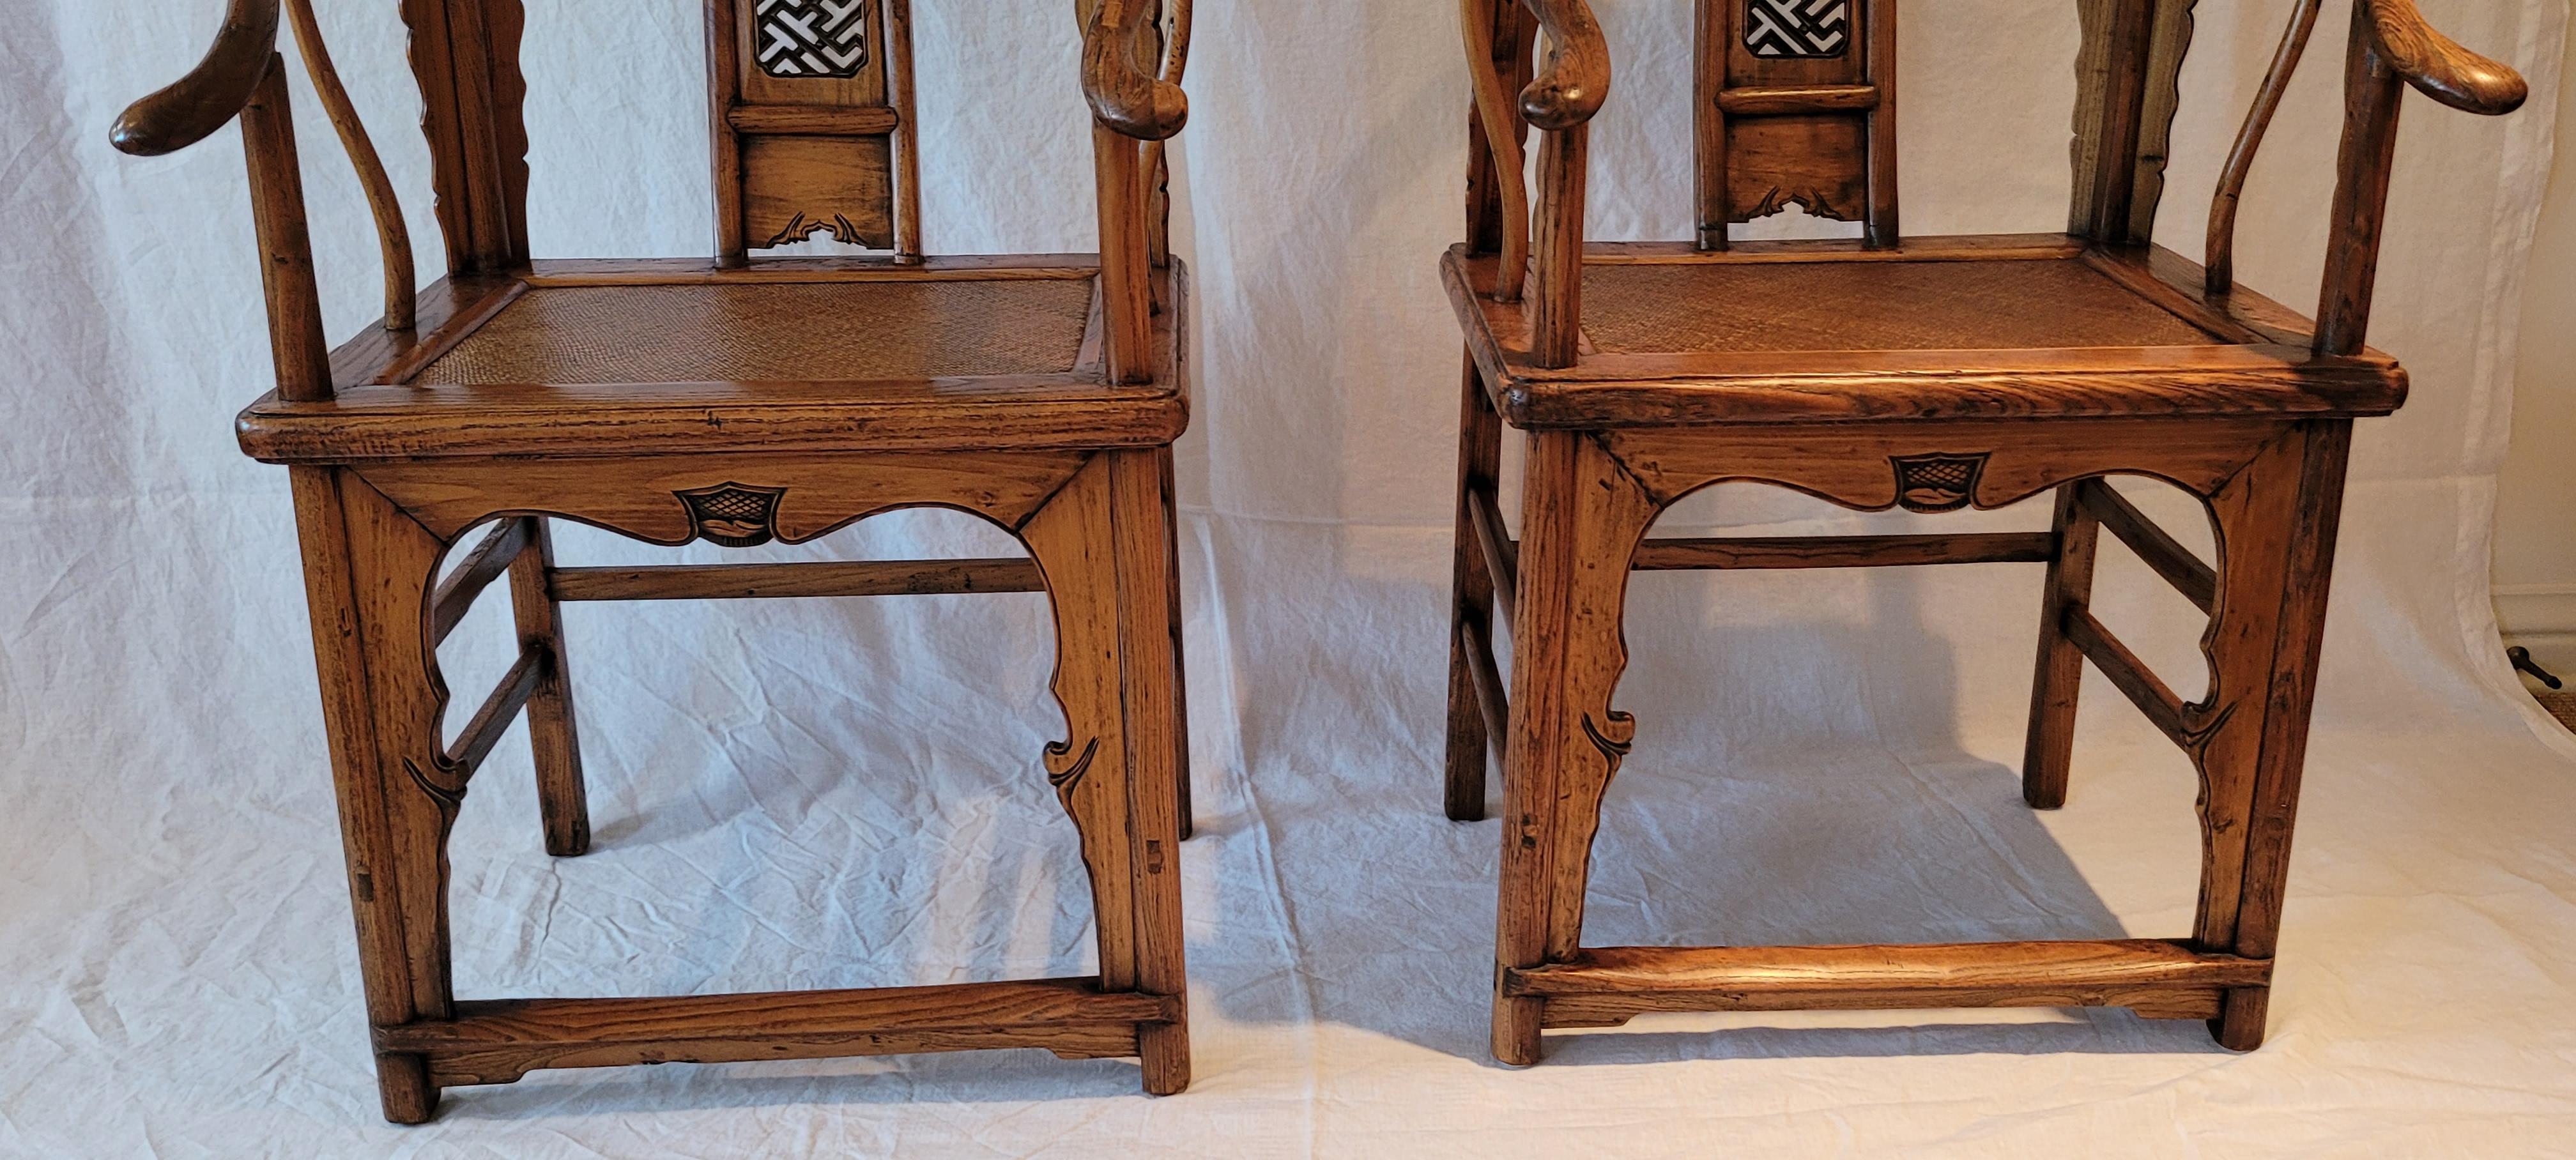 Pair of Horseshoe Back Chairs - mid 19th Century For Sale 8